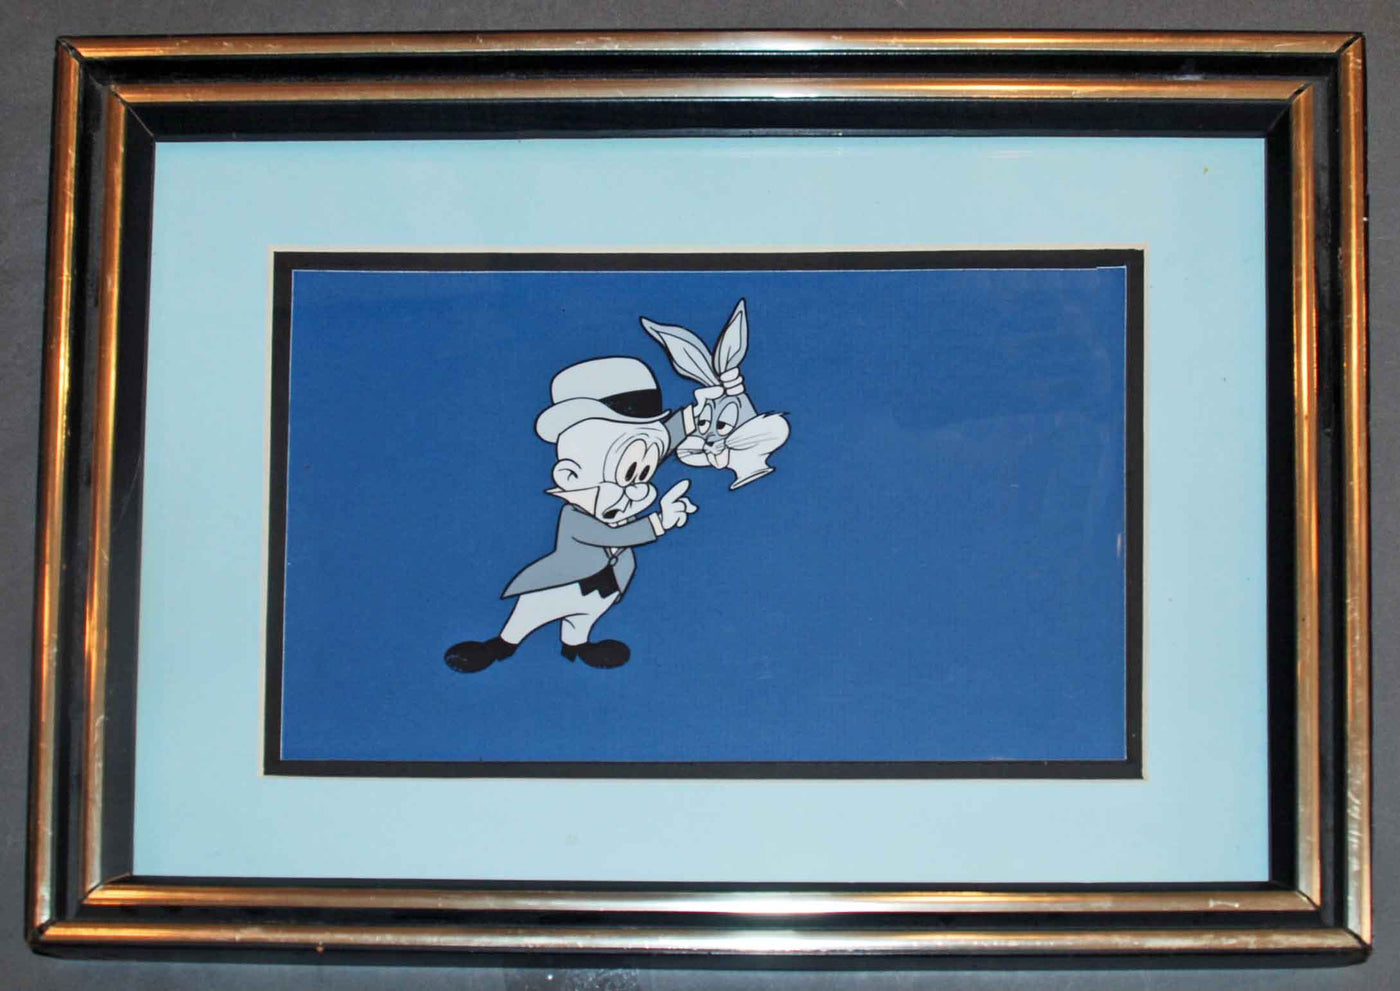 Original Warner Brothers Production Cel Featuring Bugs Bunny and Elmer Fudd